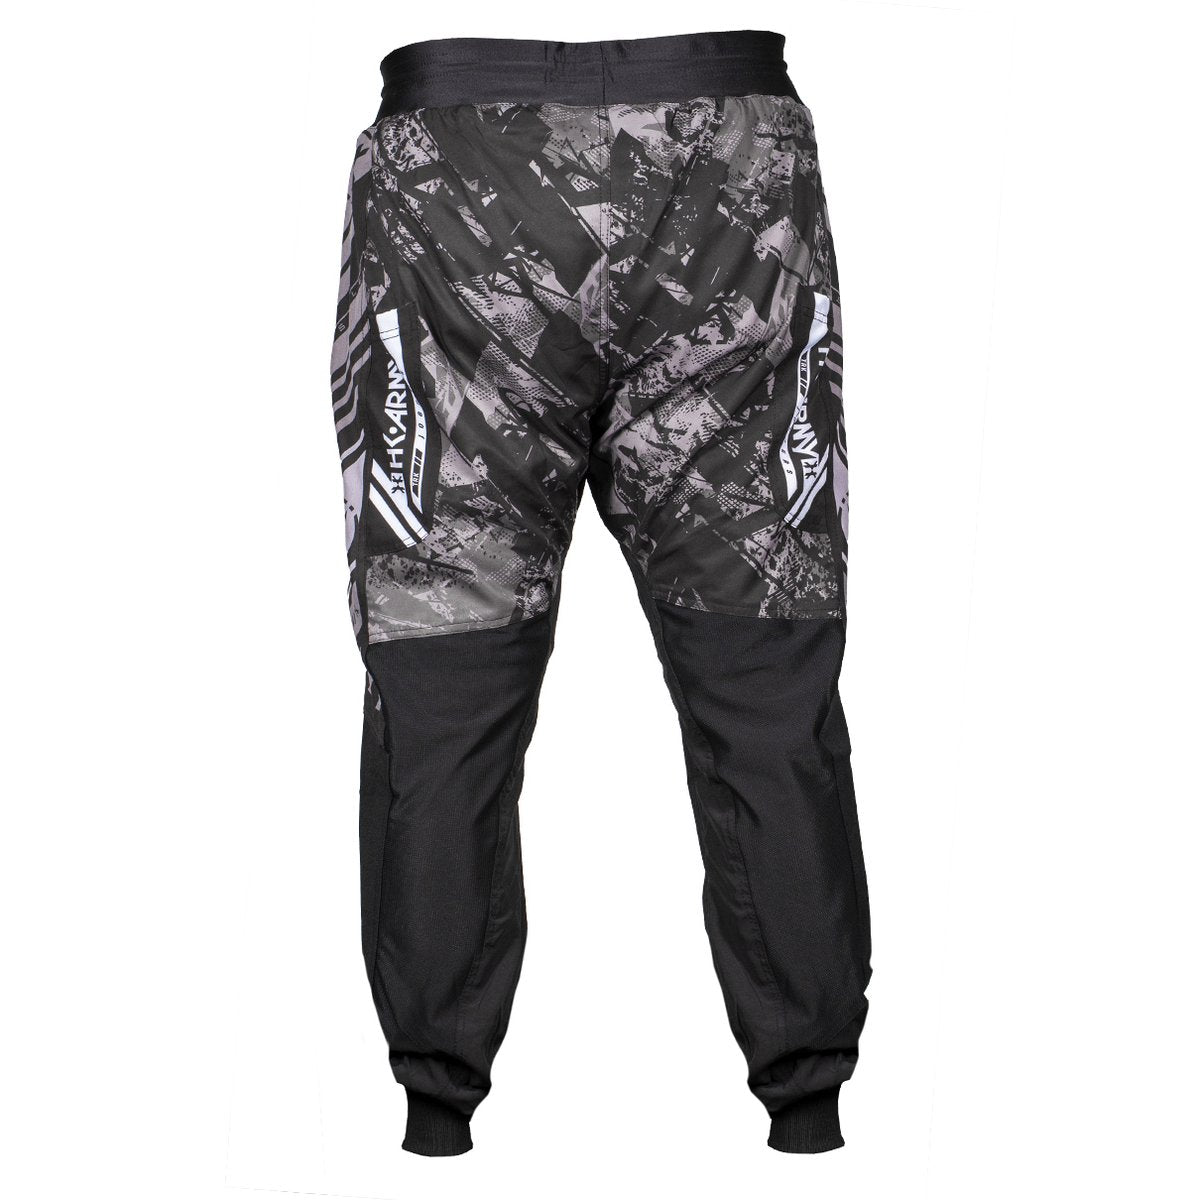 TRK AIR - Slate - Jogger Pants - Eminent Paintball And Airsoft